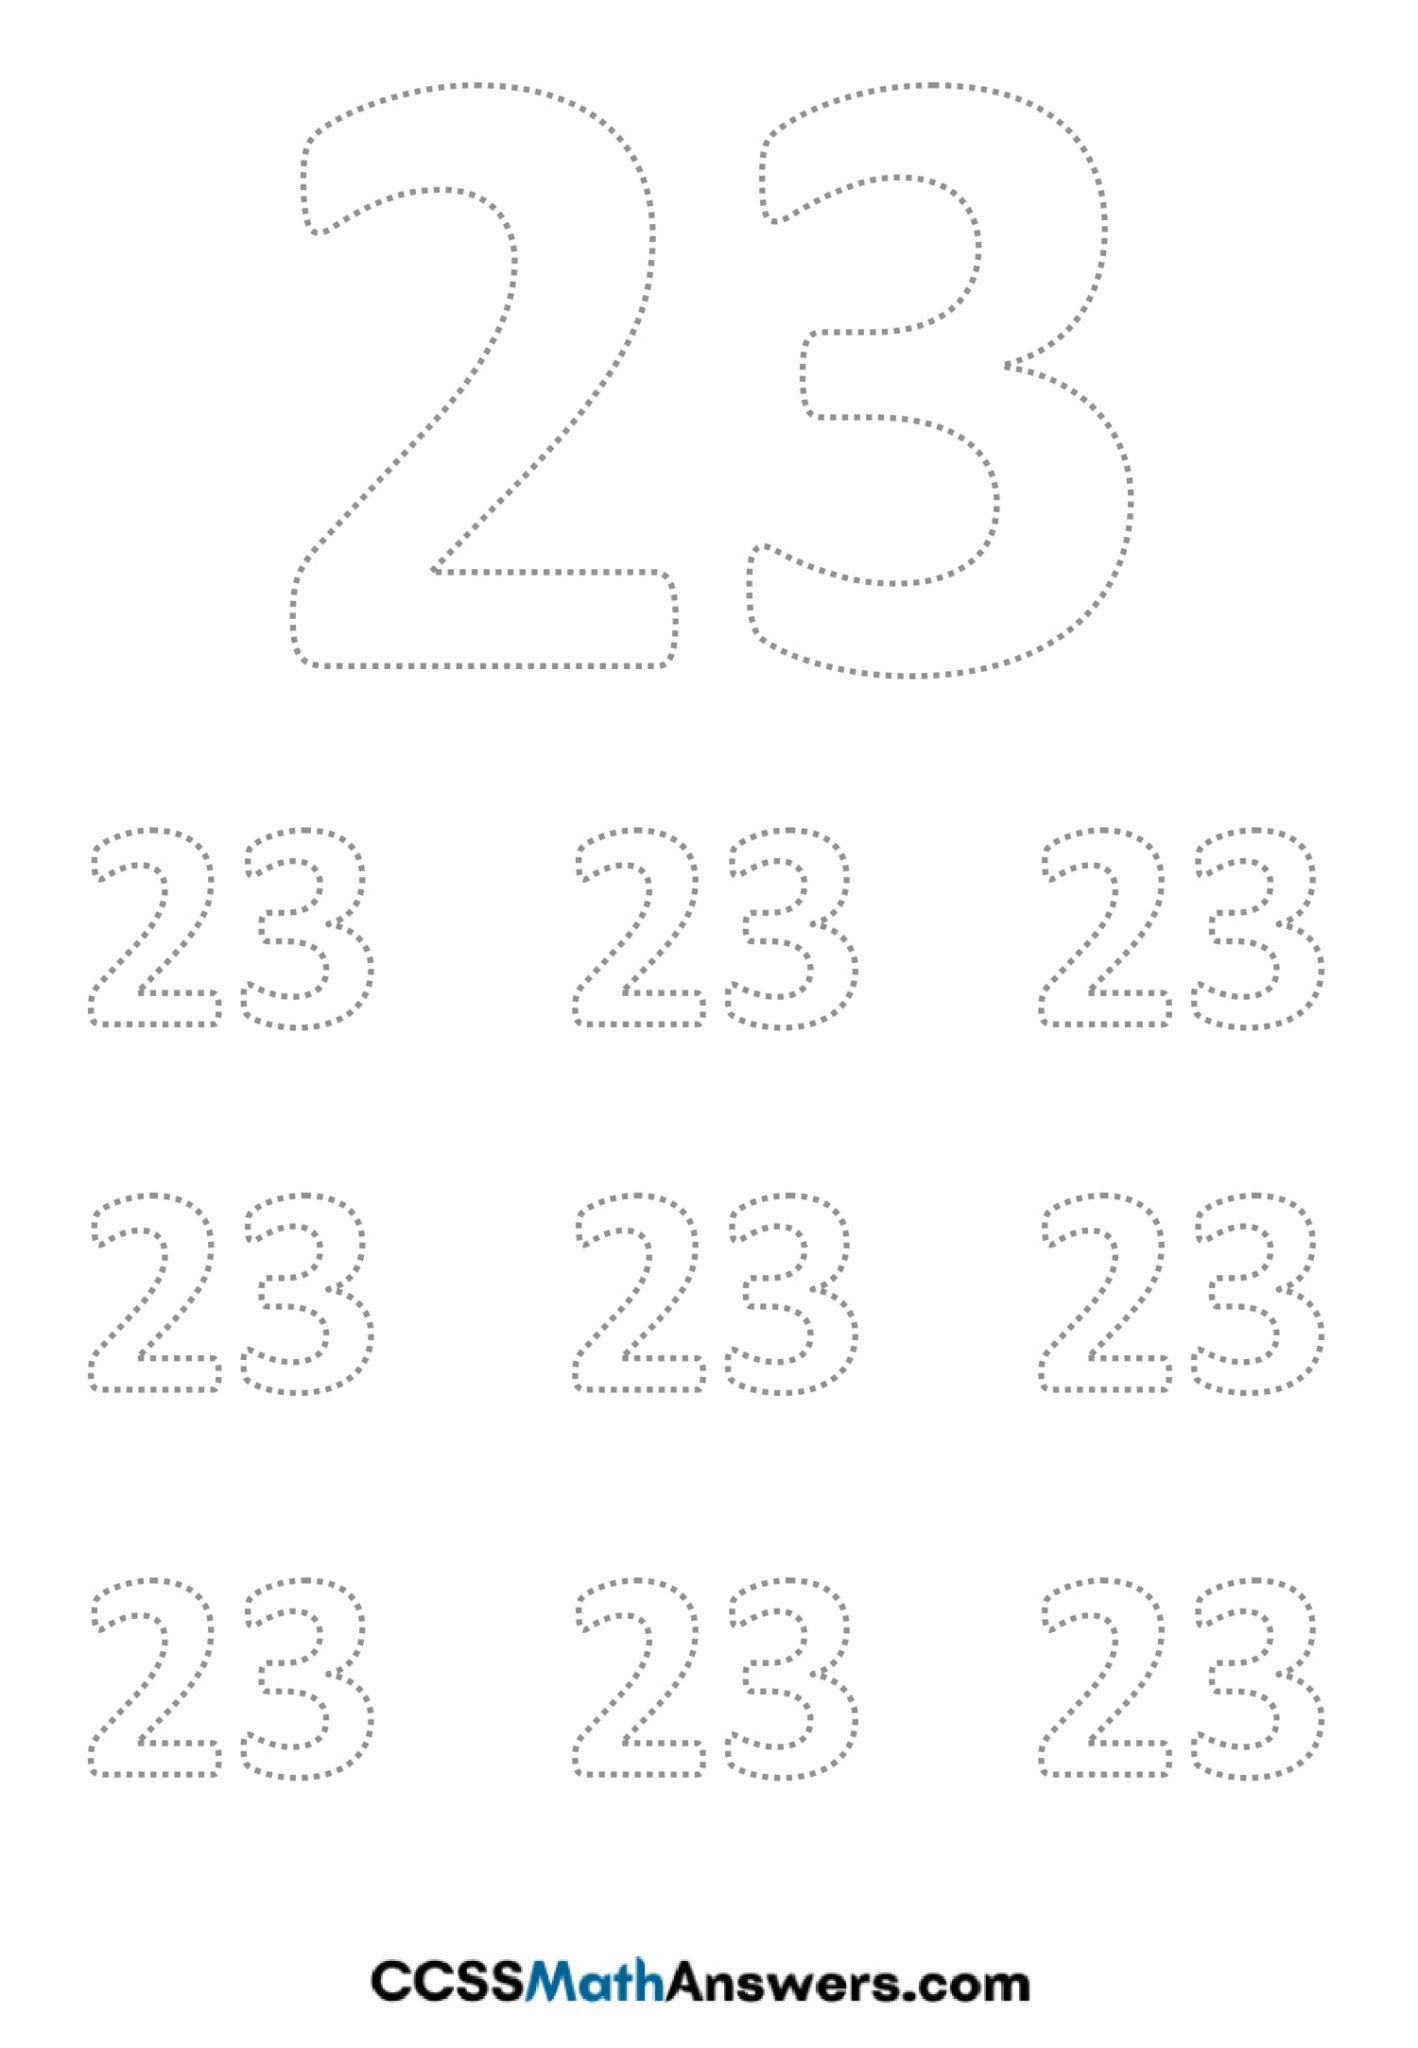 Worksheet On Number 23 Preschool Number 23 Tracing Counting Writing Activity Worksheets